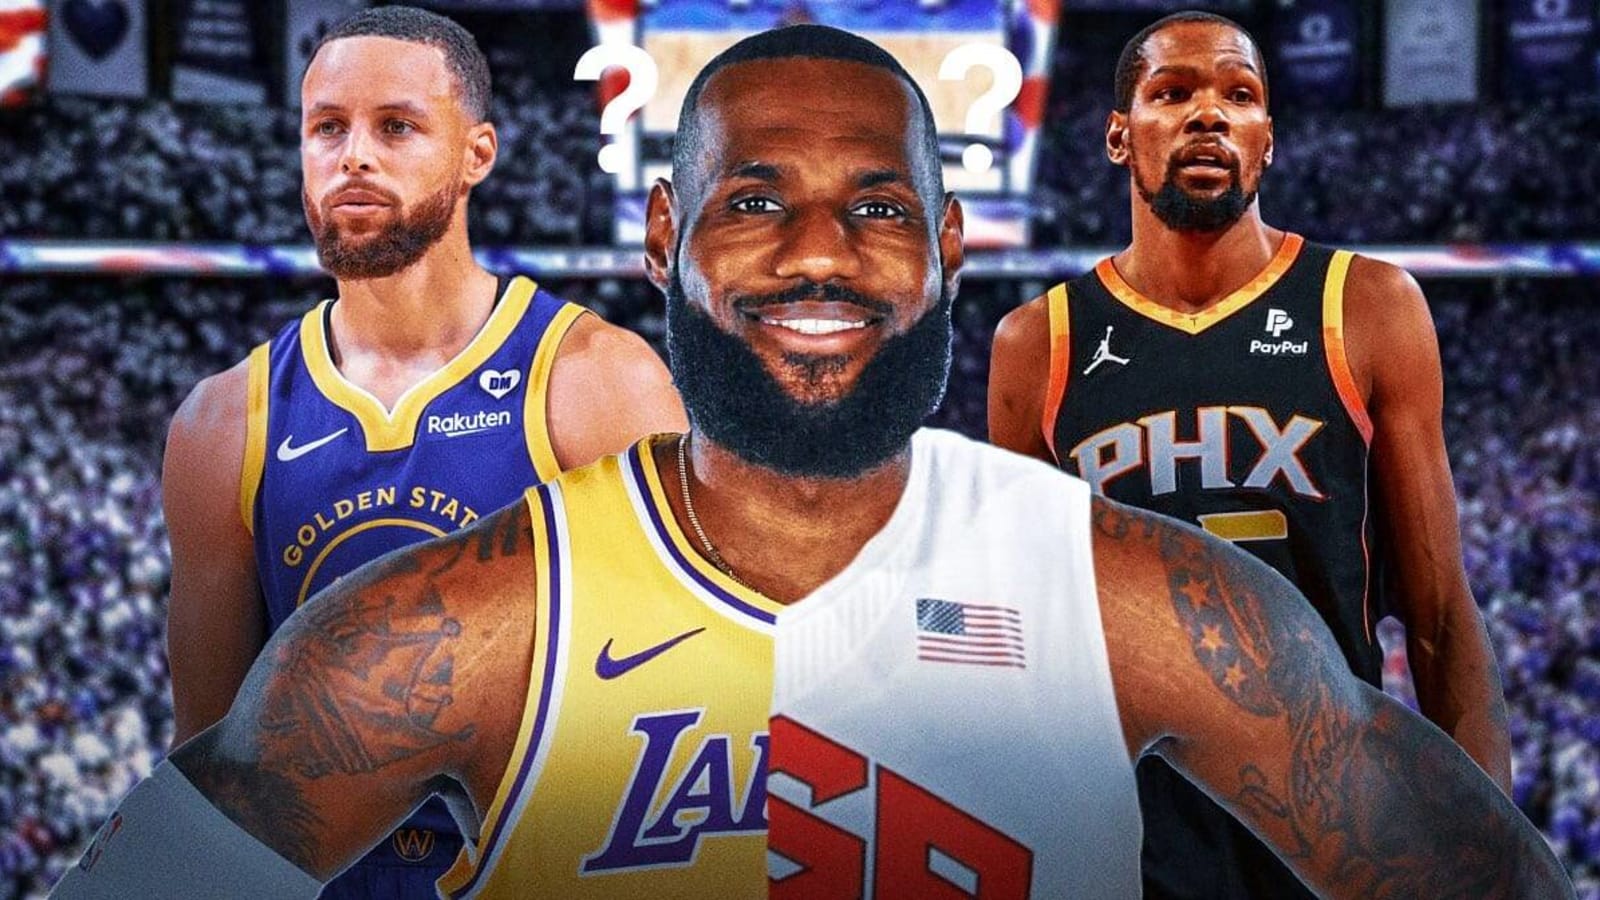 Sources: How LeBron James’ decision on Lakers future will be influenced by Stephen Curry, Kevin Durant